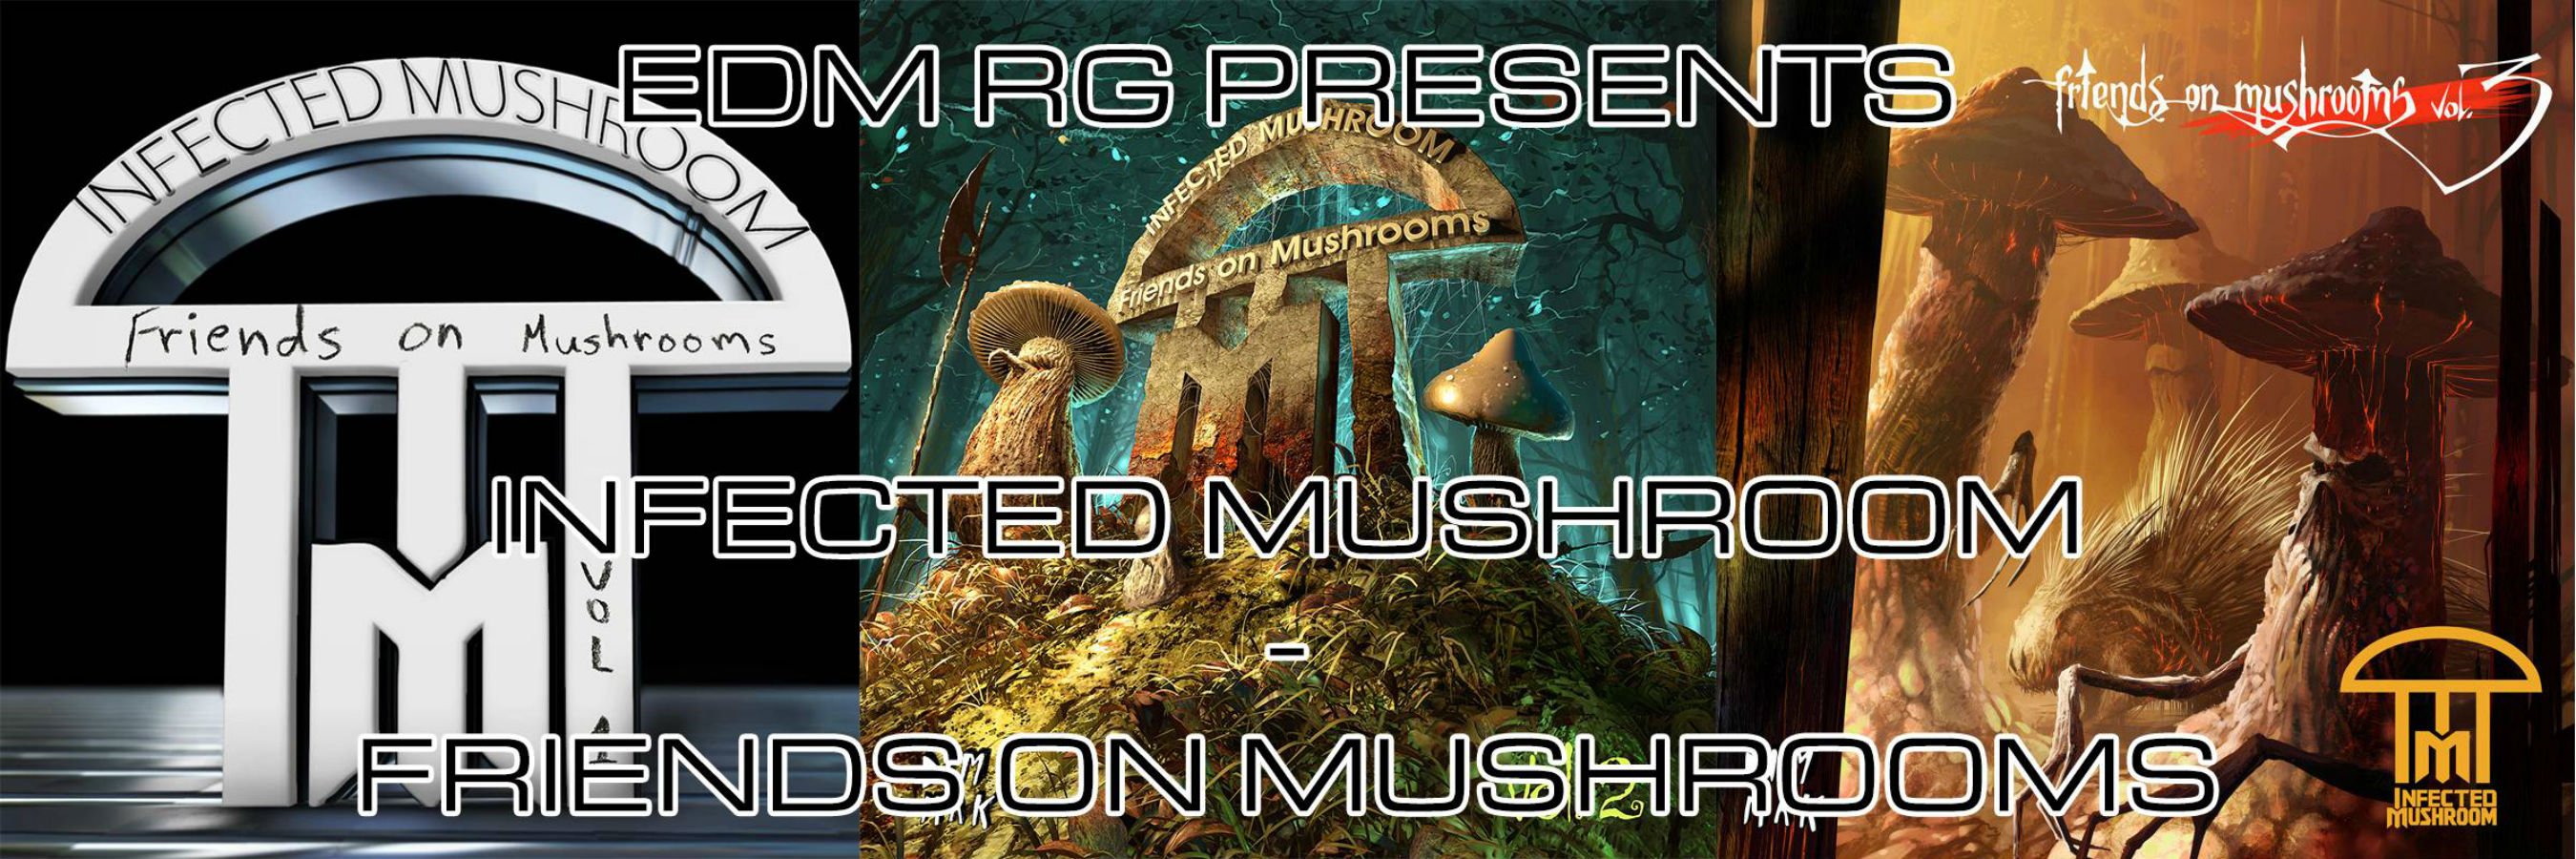 infected, Mushroom, Psychedelic, Trance, Electro, House, Electronica, Electronic, Rock, Industrial, Disc, Jockey, 1imush, Artwork, Fantasy, Poster Wallpaper